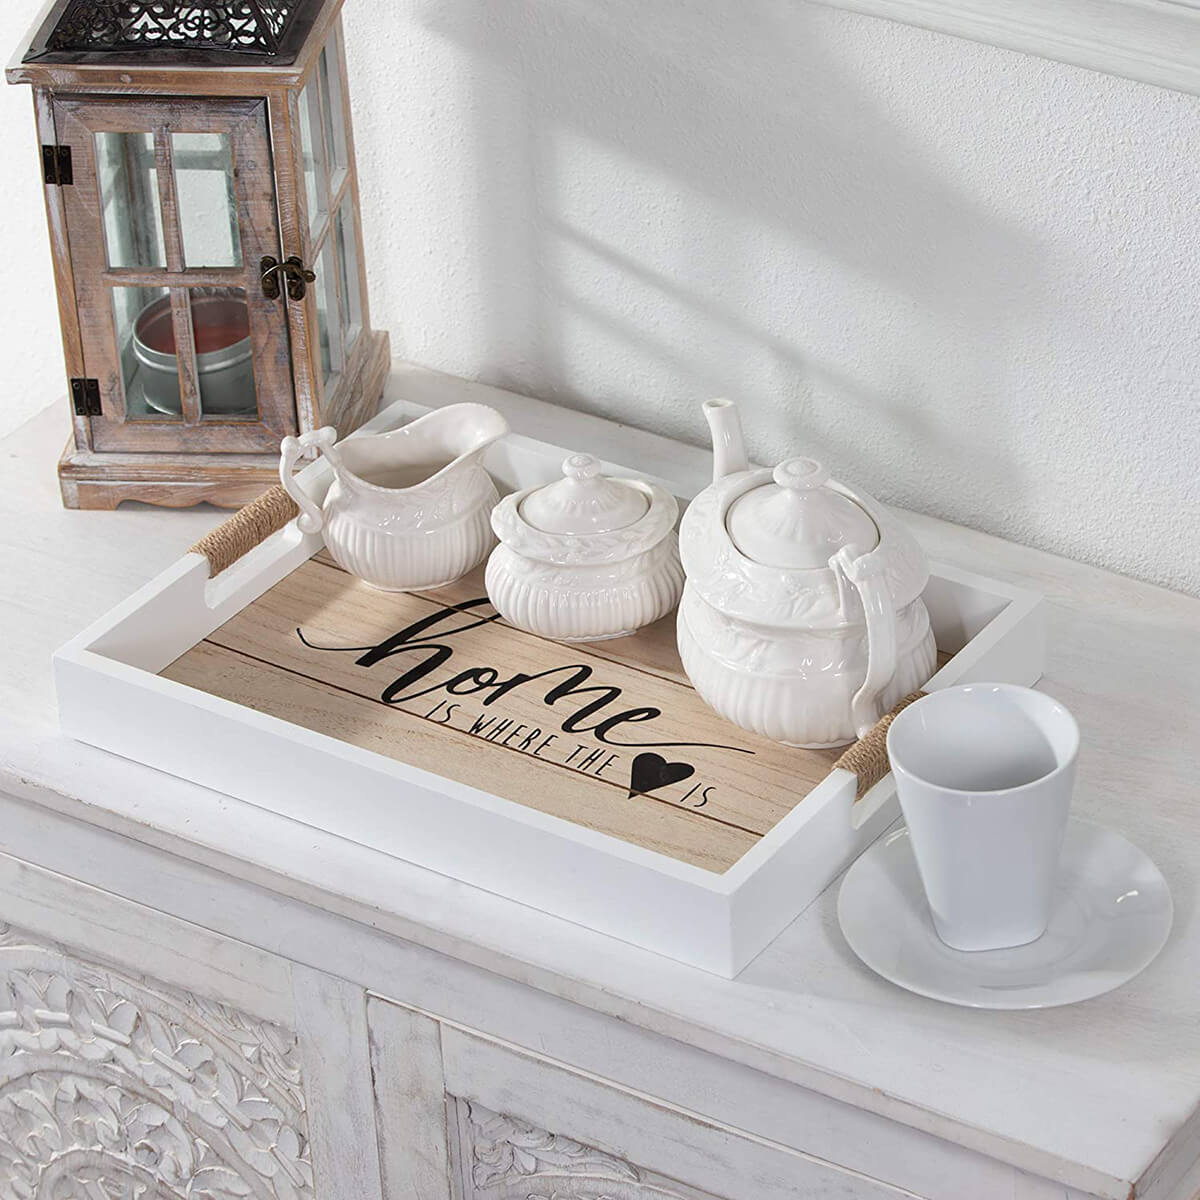 Wooden Ottoman Coffee Tray With Decorative Design